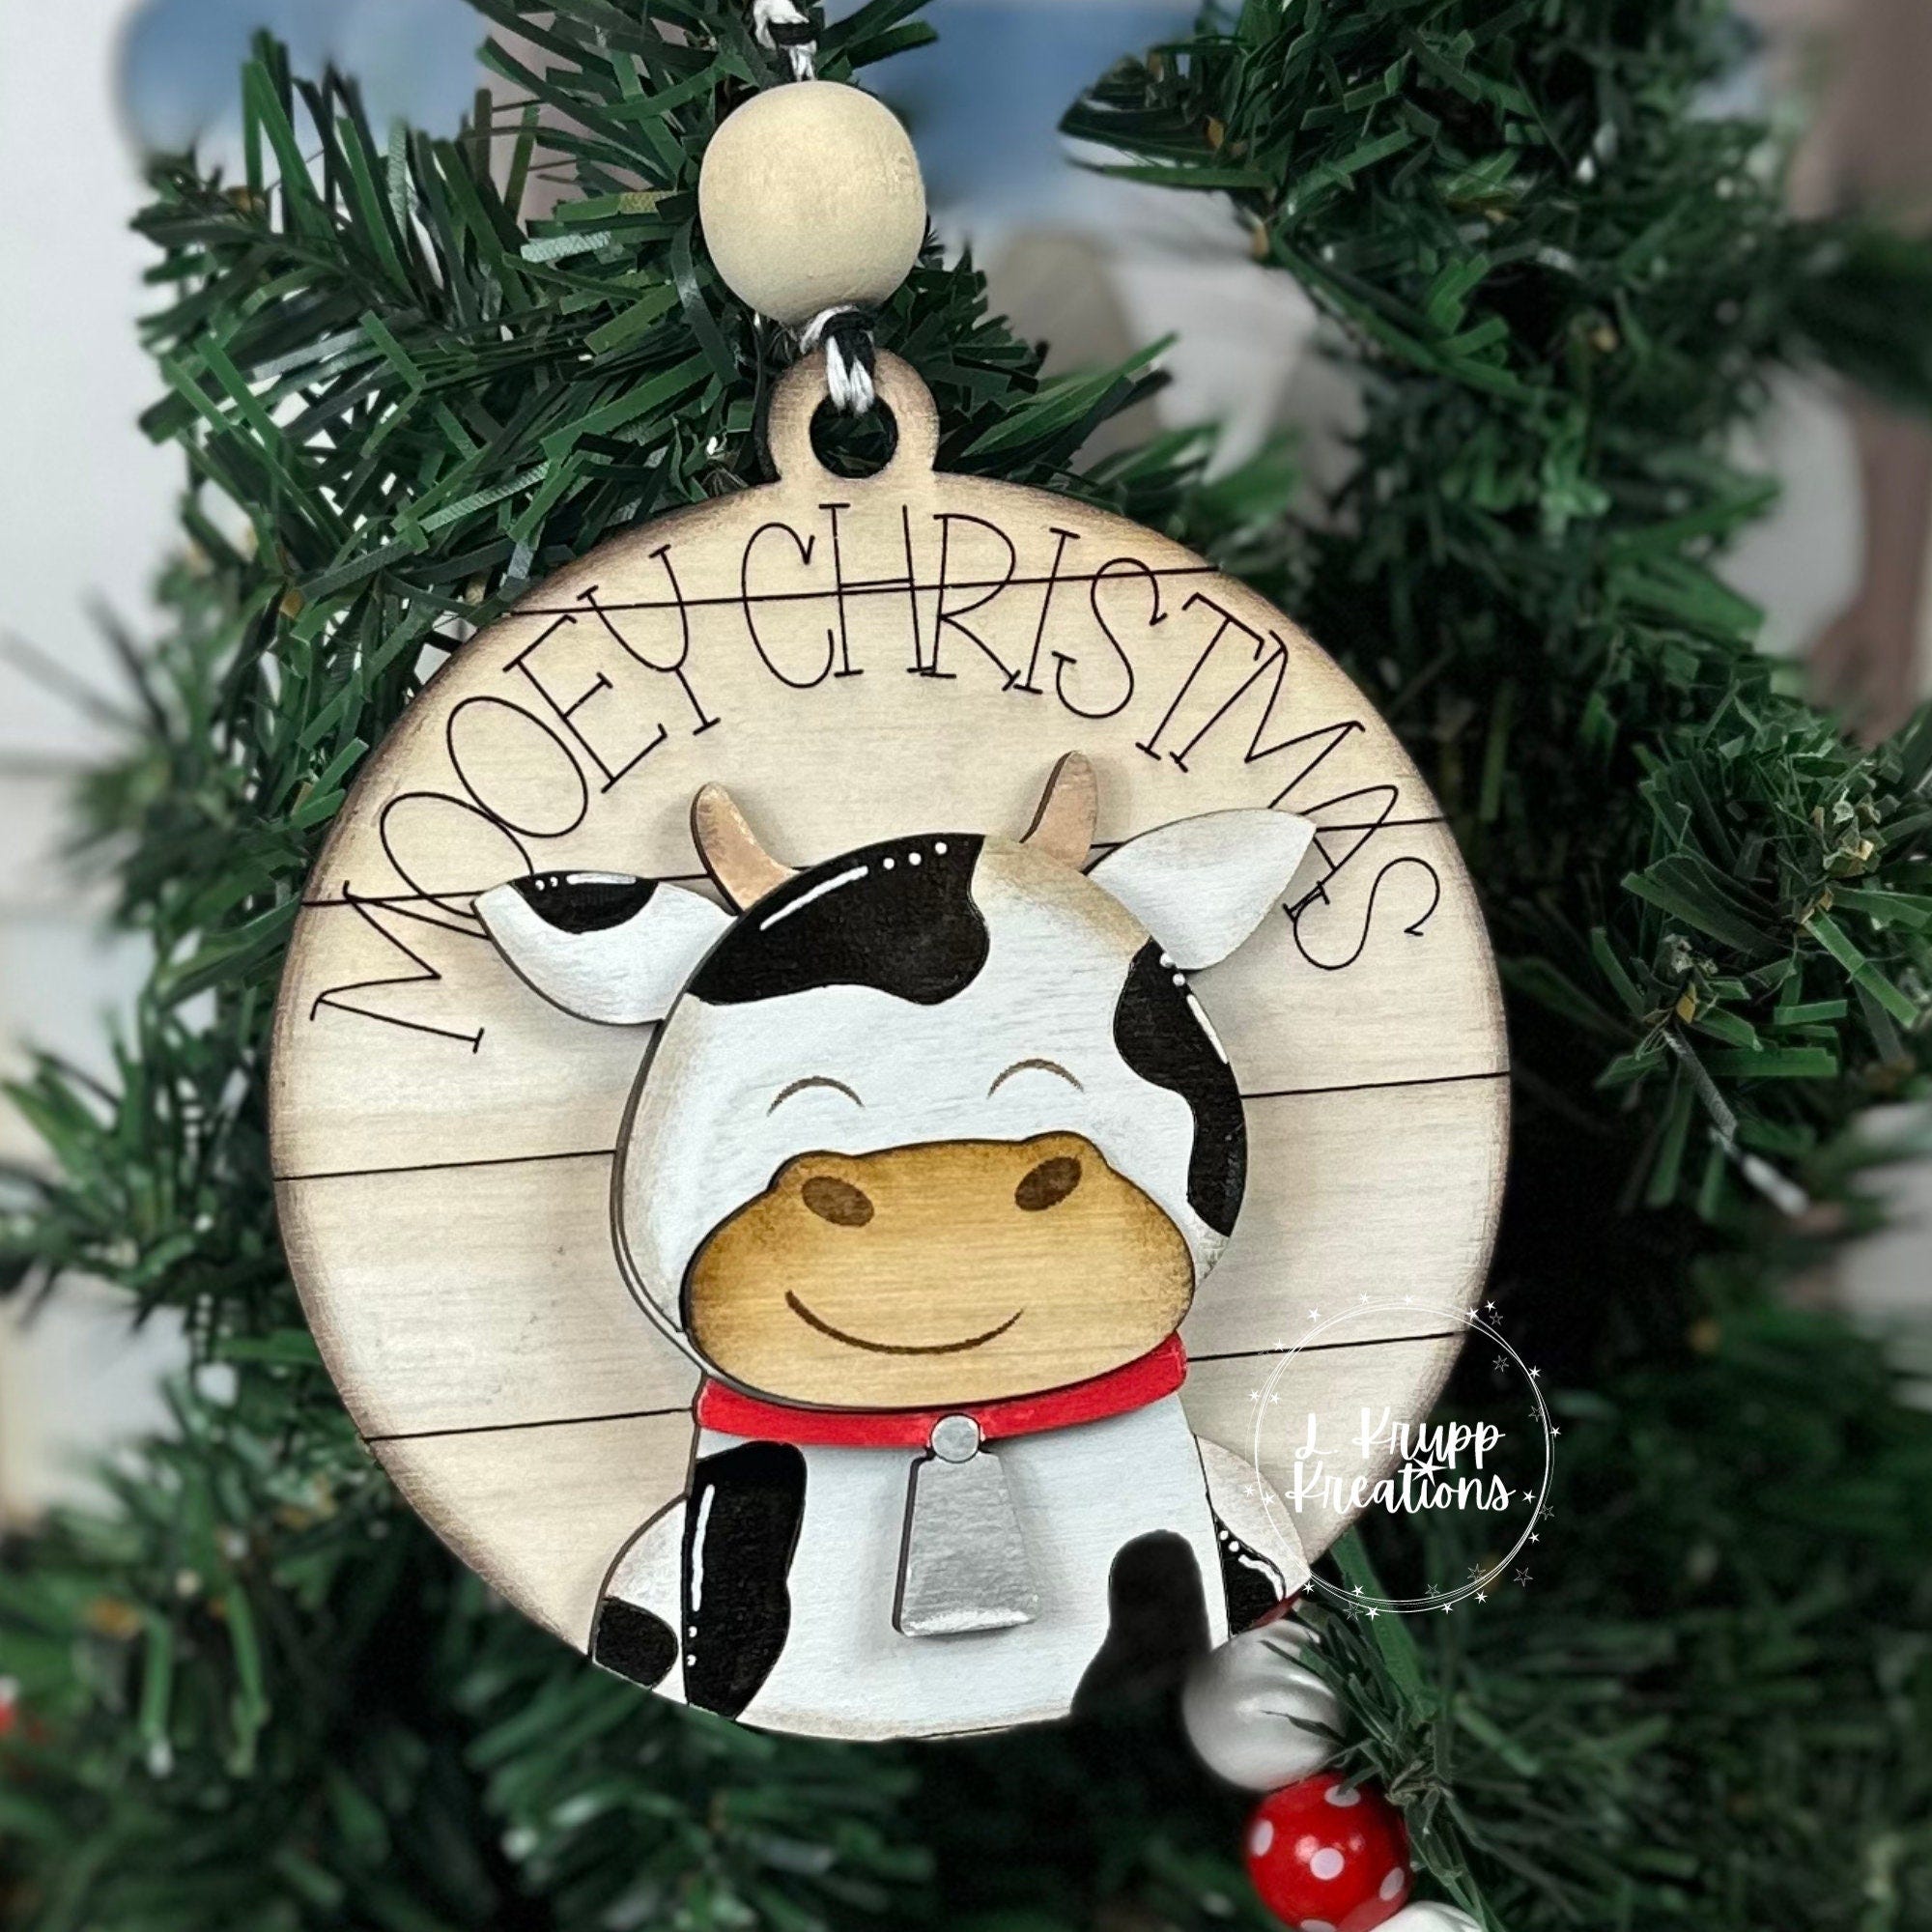 Charming Mooey Christmas Cow Ornament, Jersey Cow Ornament, Wood Cow Ornament, Wood Ornament, Christmas Cow Ornament